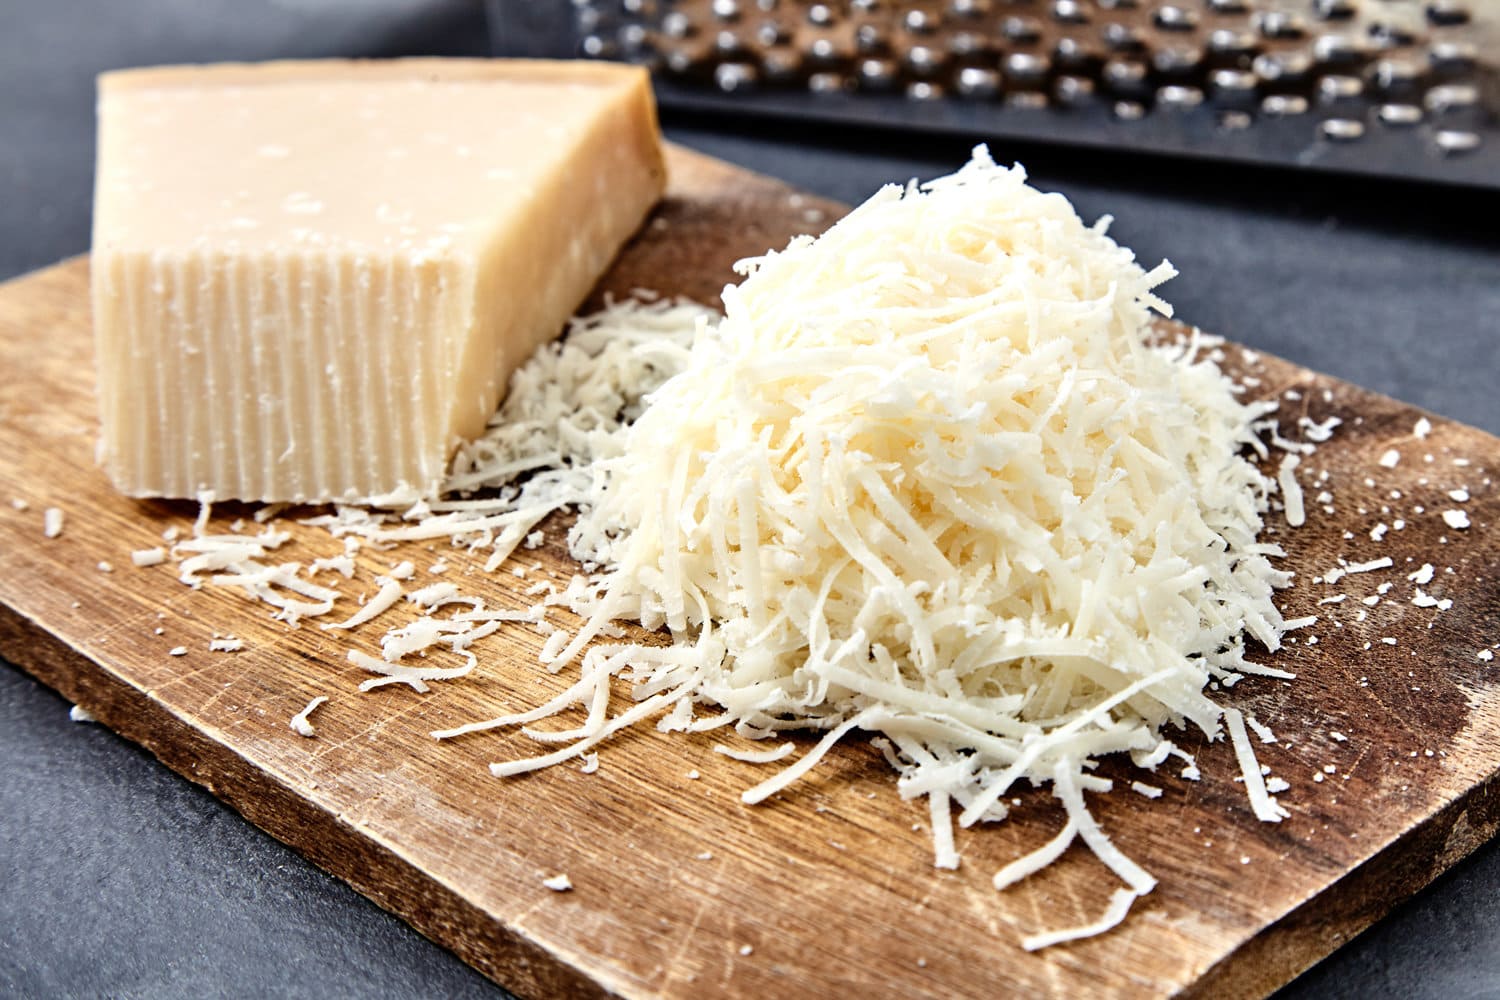 Piece and grated parmigiano reggiano or parmesan cheese on wwood board on checkered napkin . Grated parmesan uses in pasta dishes, soups, risottos and grated over salads. 